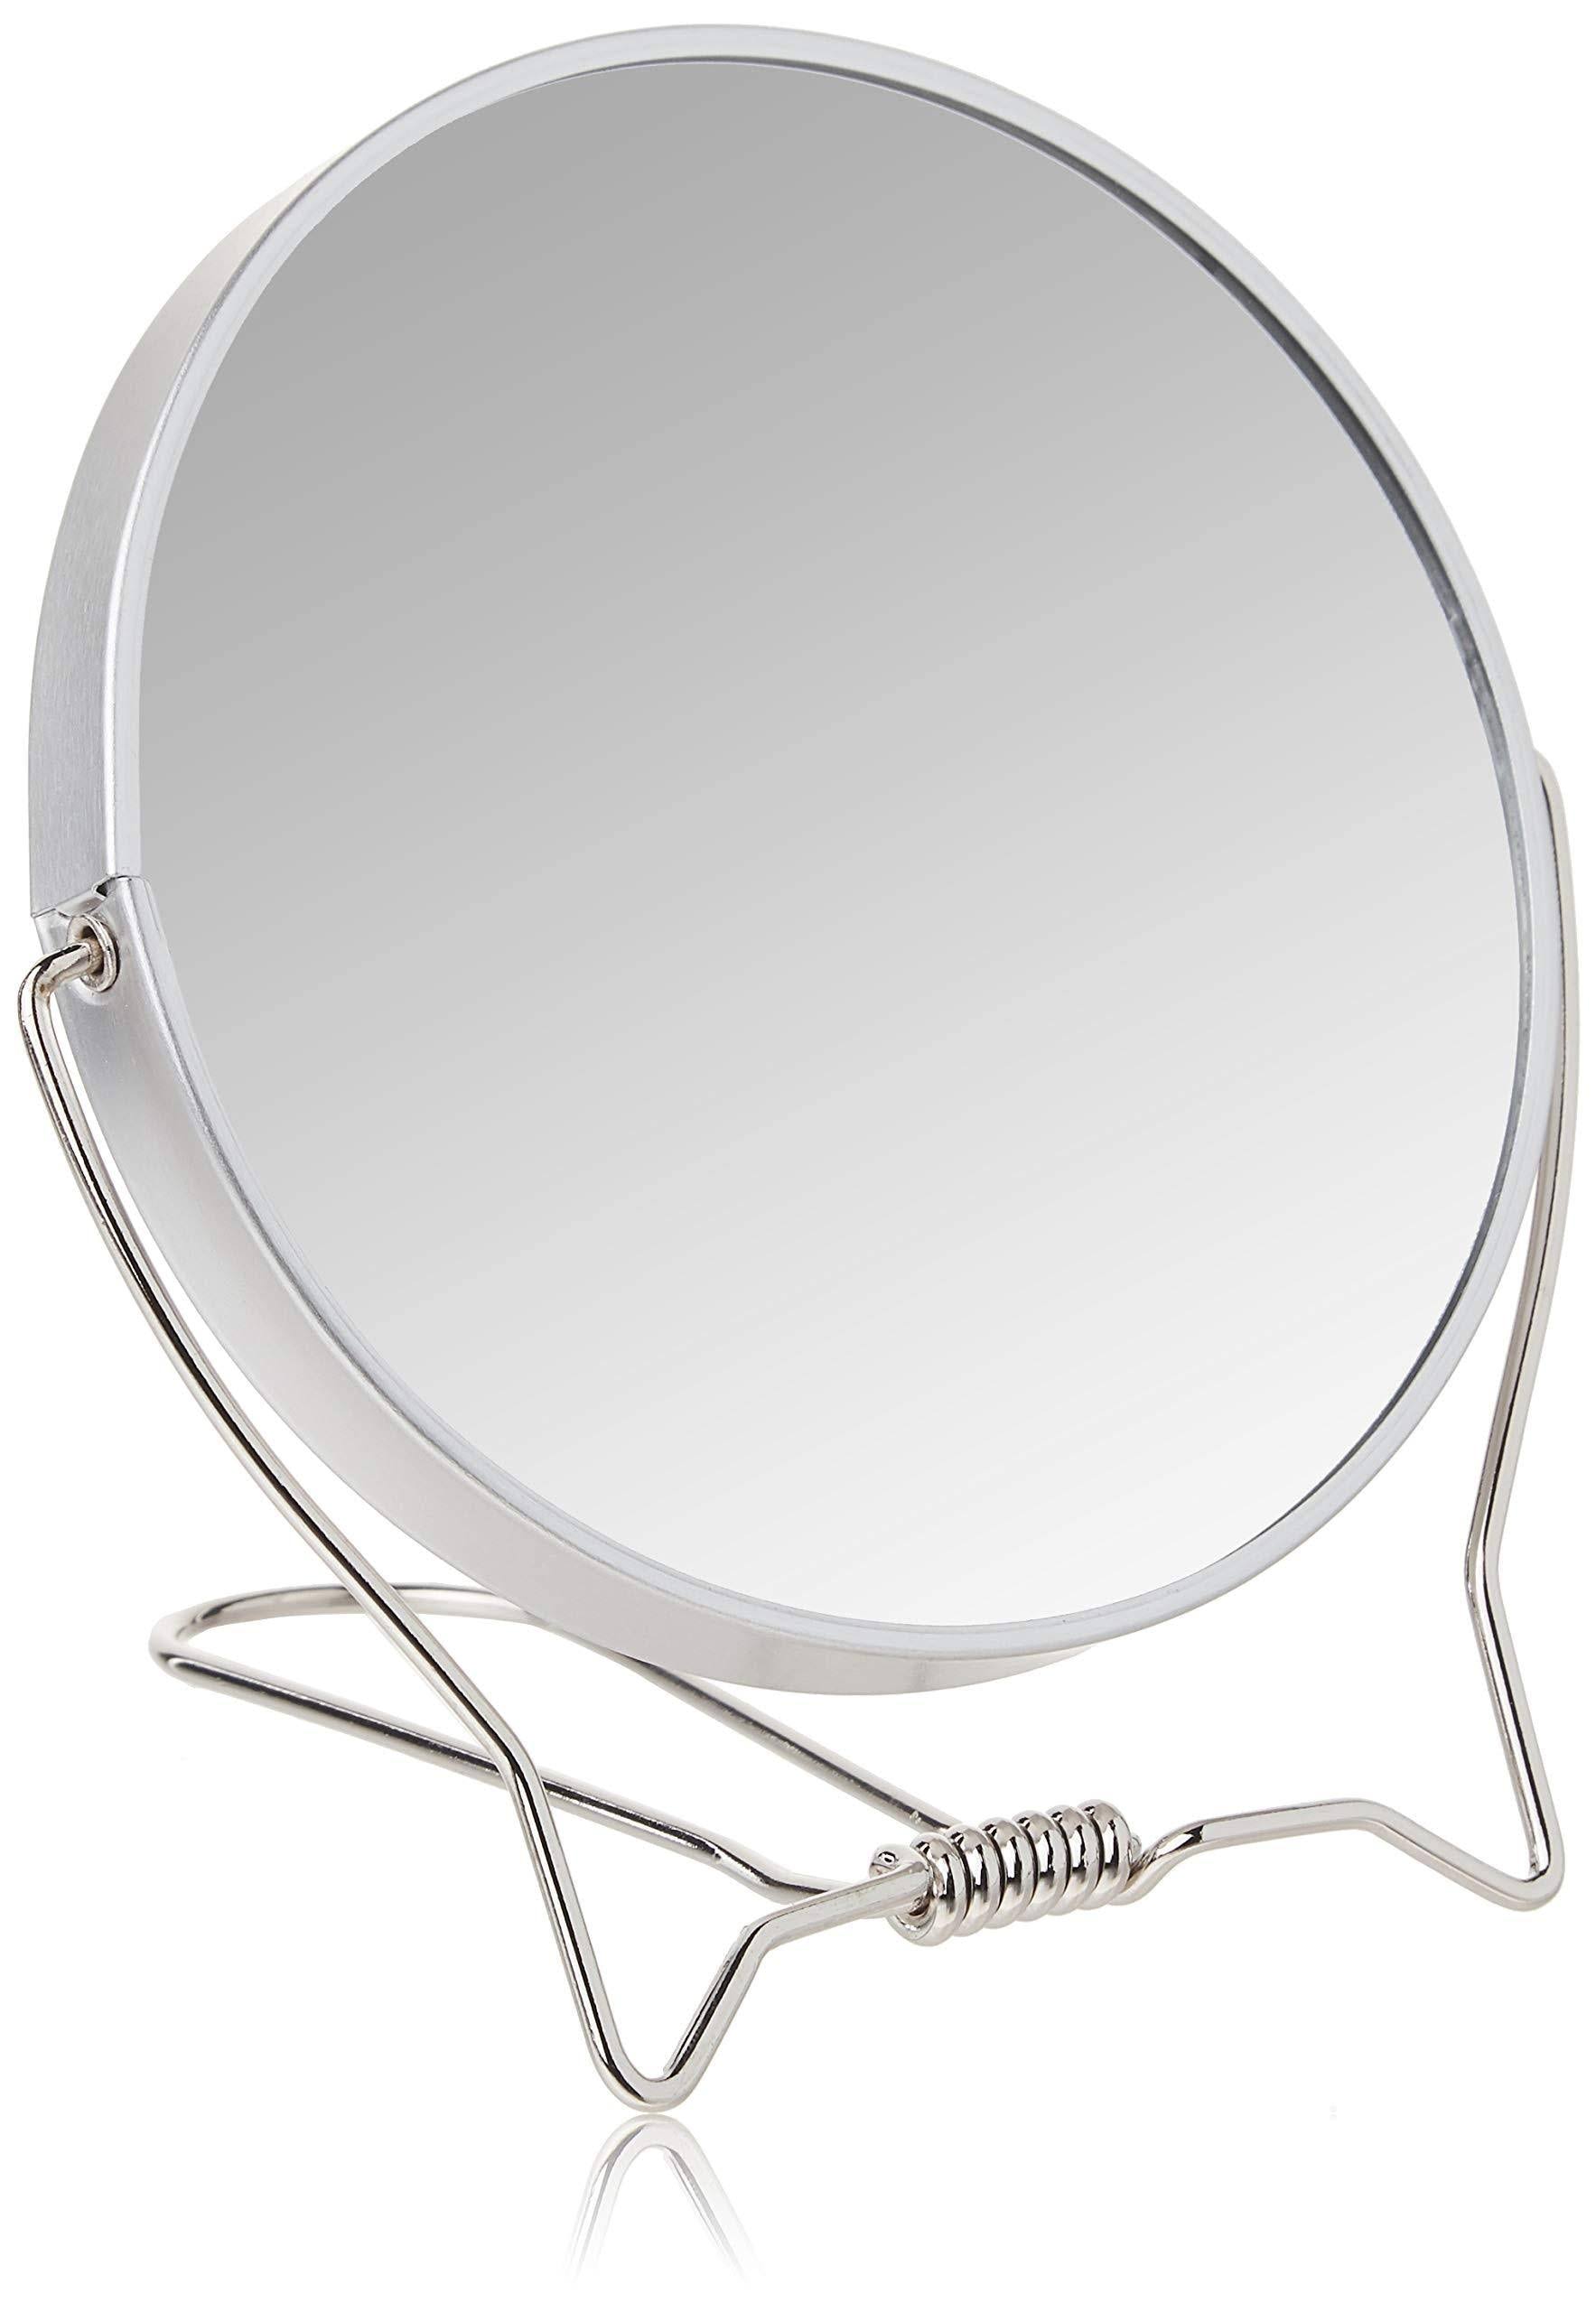 Goody 2 Sided Standing Mirror